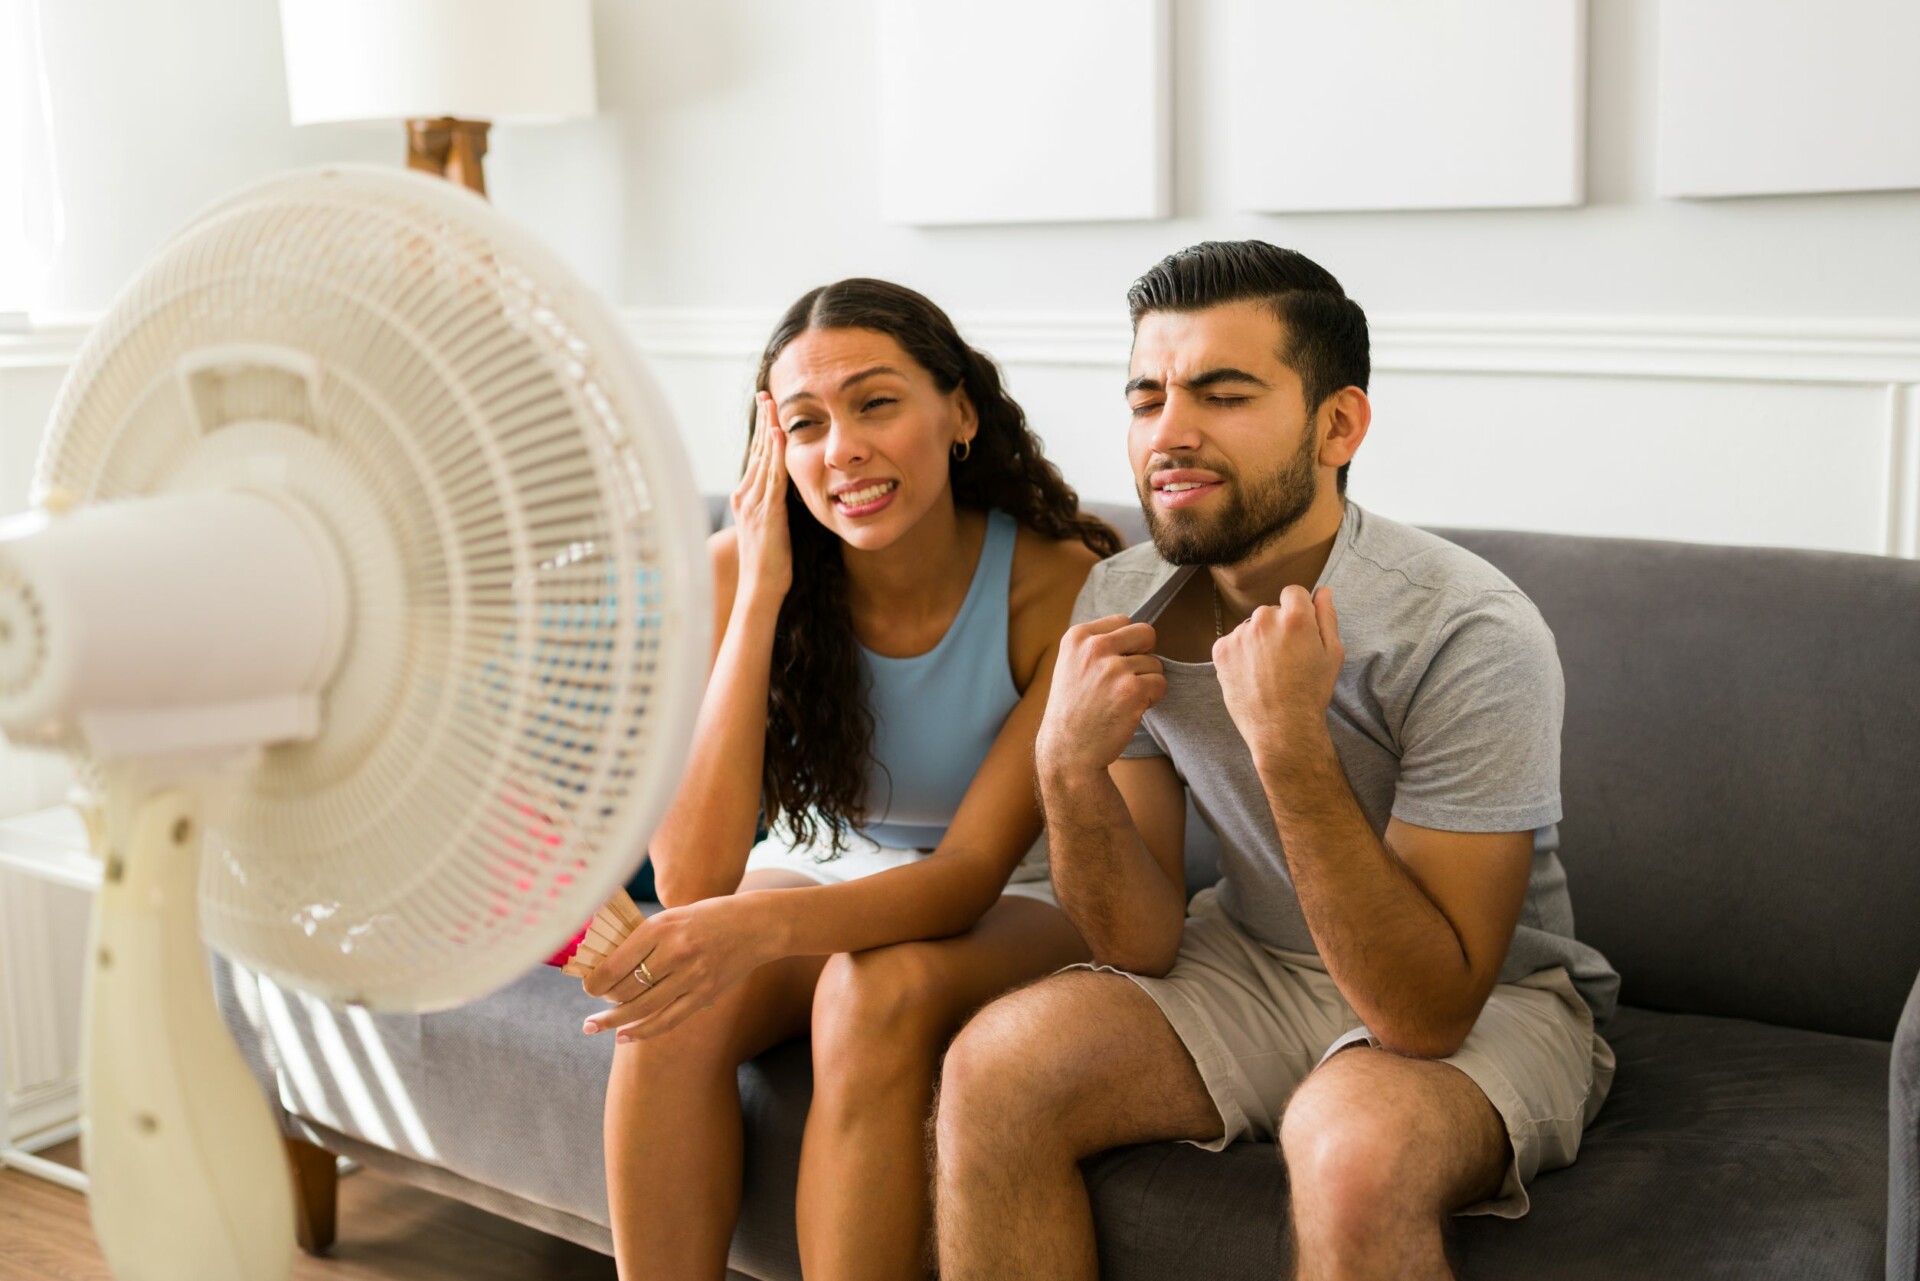 Are Fans Bad for the Environment? 6 Surprising Facts